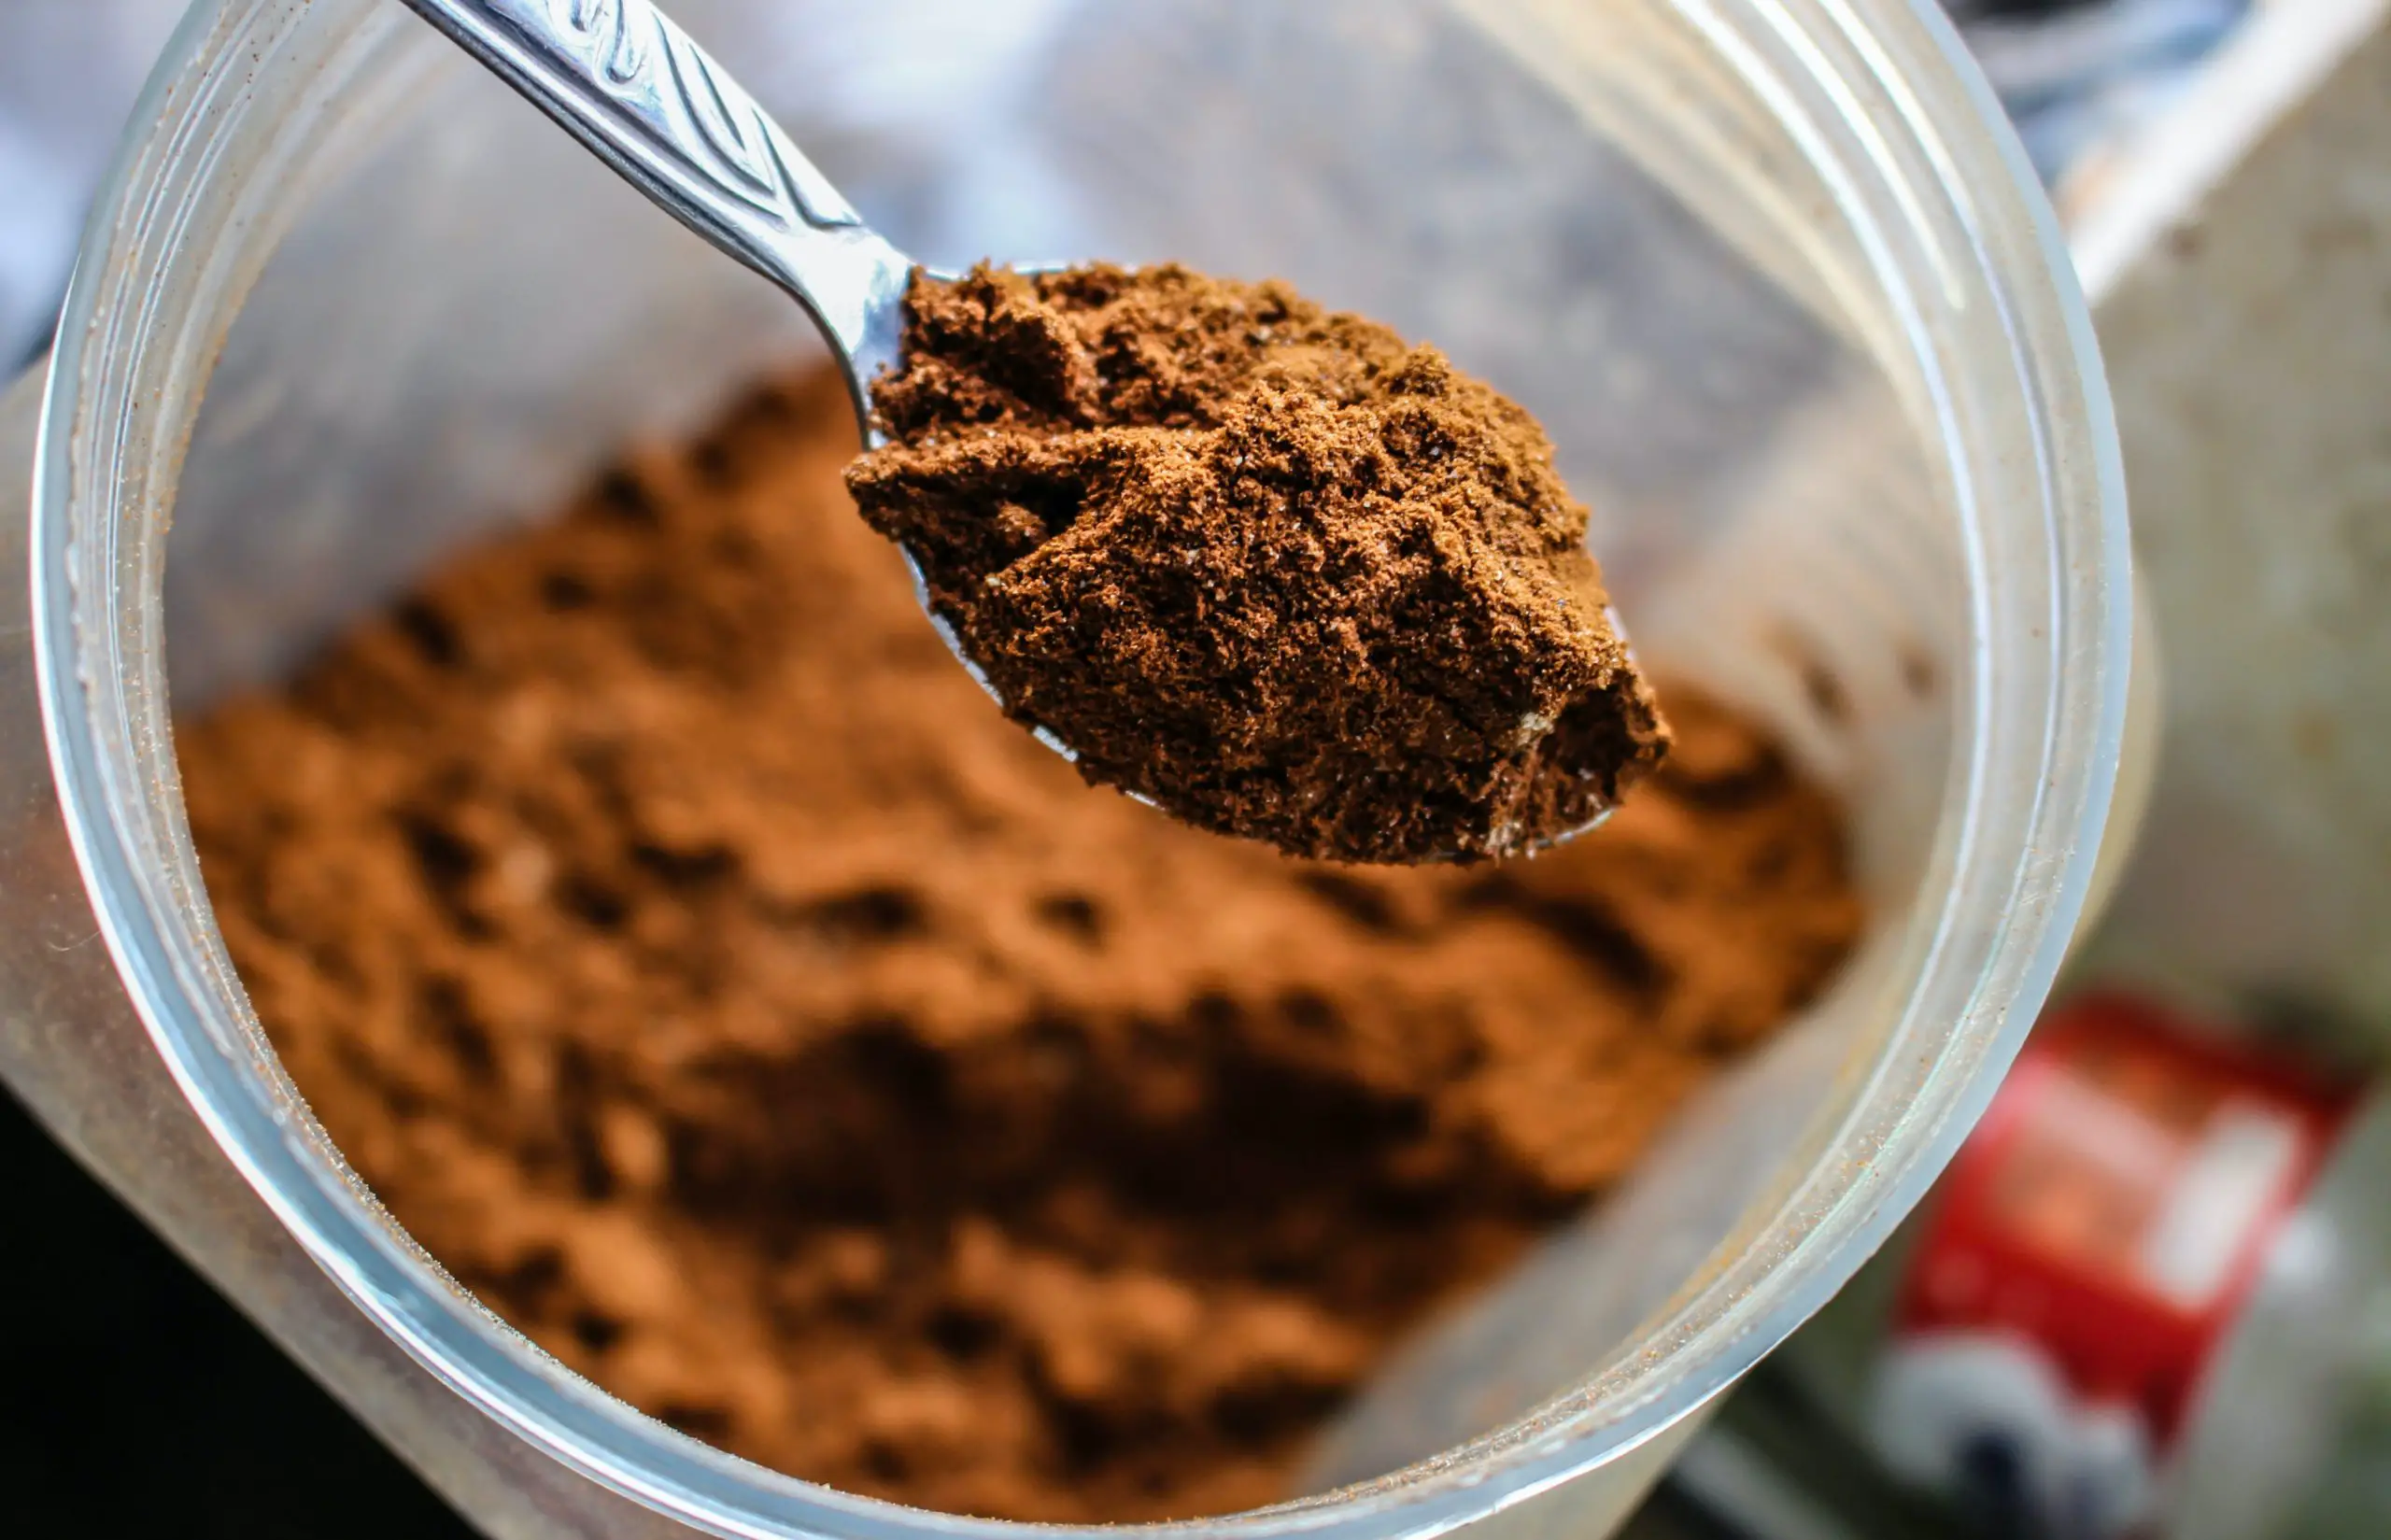 Taking protein powder to help build your six pack abs